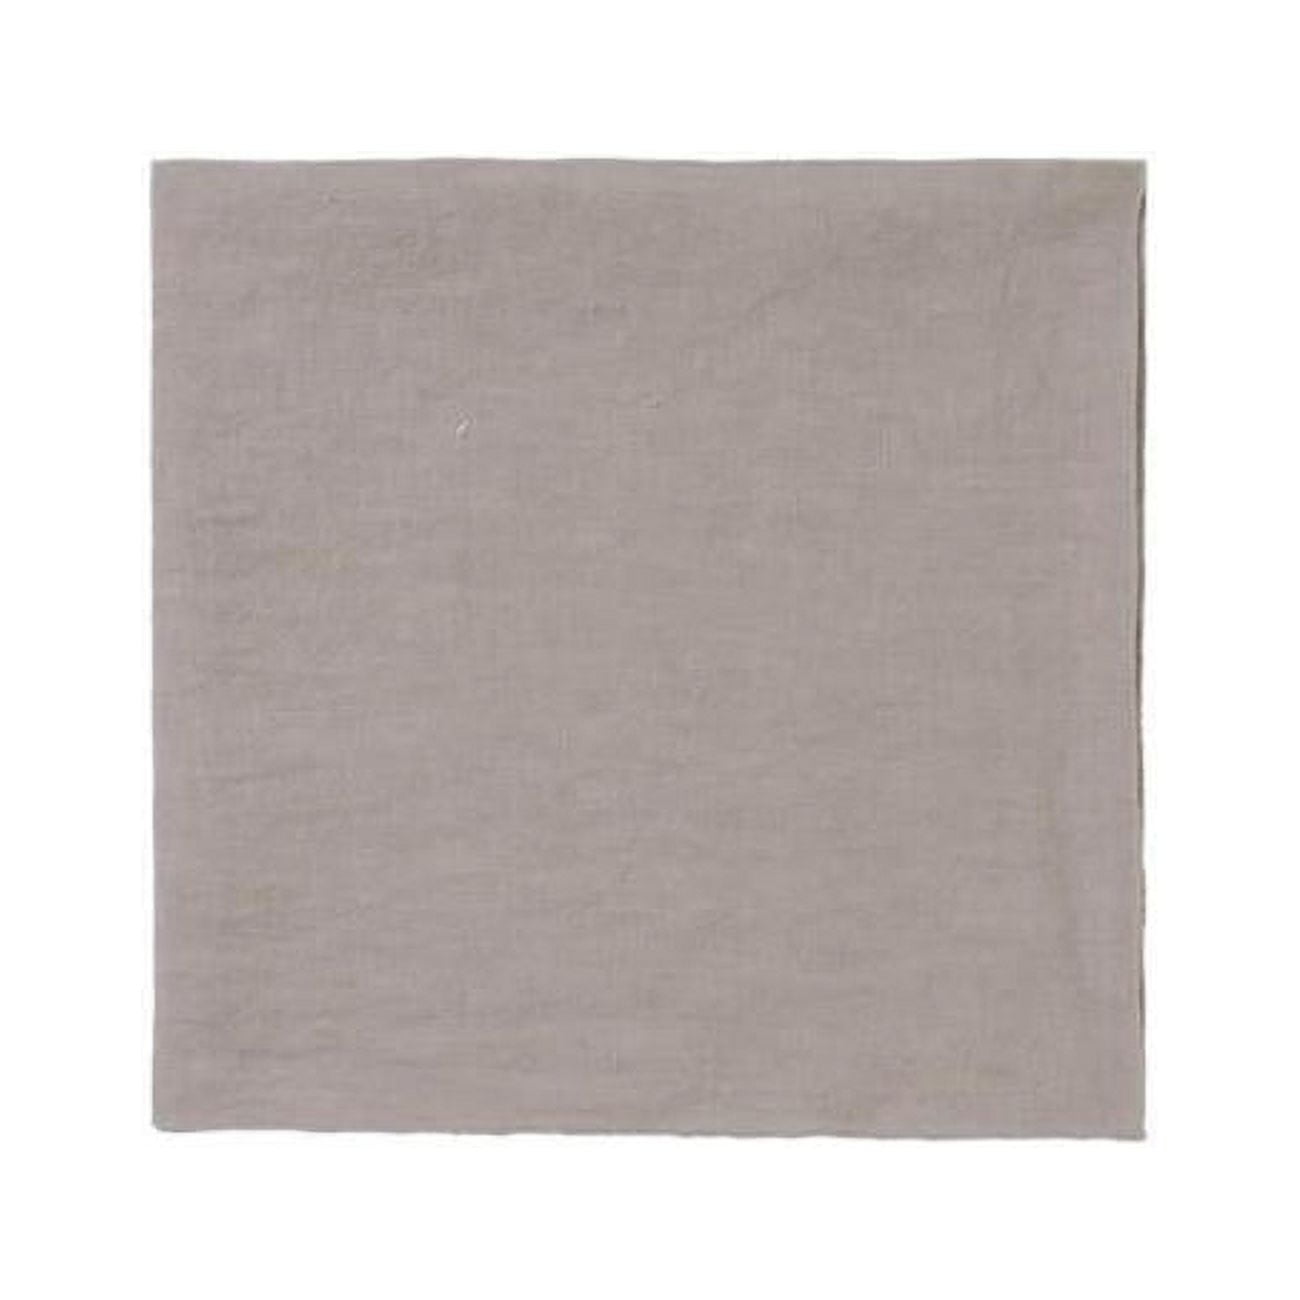 Picture of Blomus 63729.4 17 x 17 in. Lineo Linen Table Napkin, Fungi - Set of 4